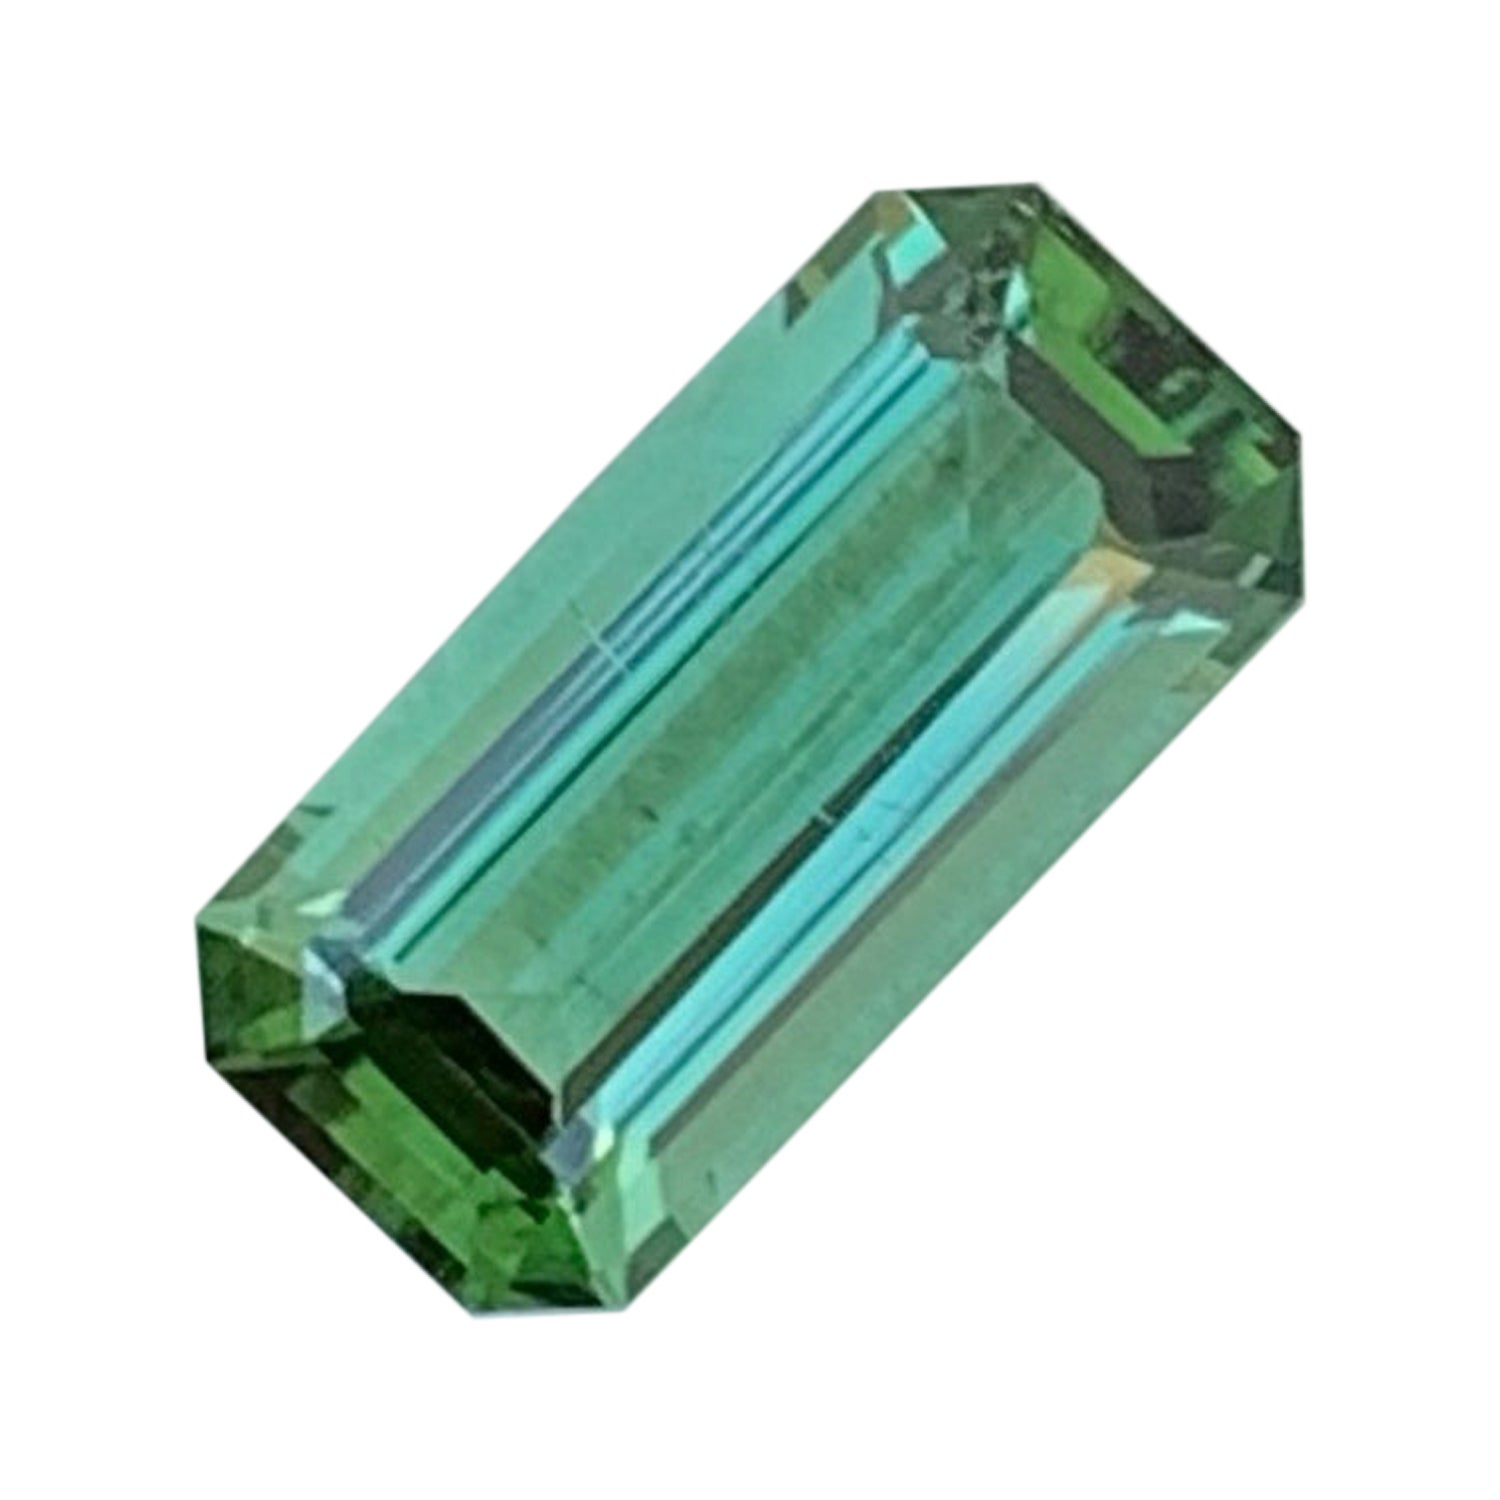 Majestic Natural Tourmaline For Ring 1.95 CT Afghan Tourmaline For Jewelry Size 